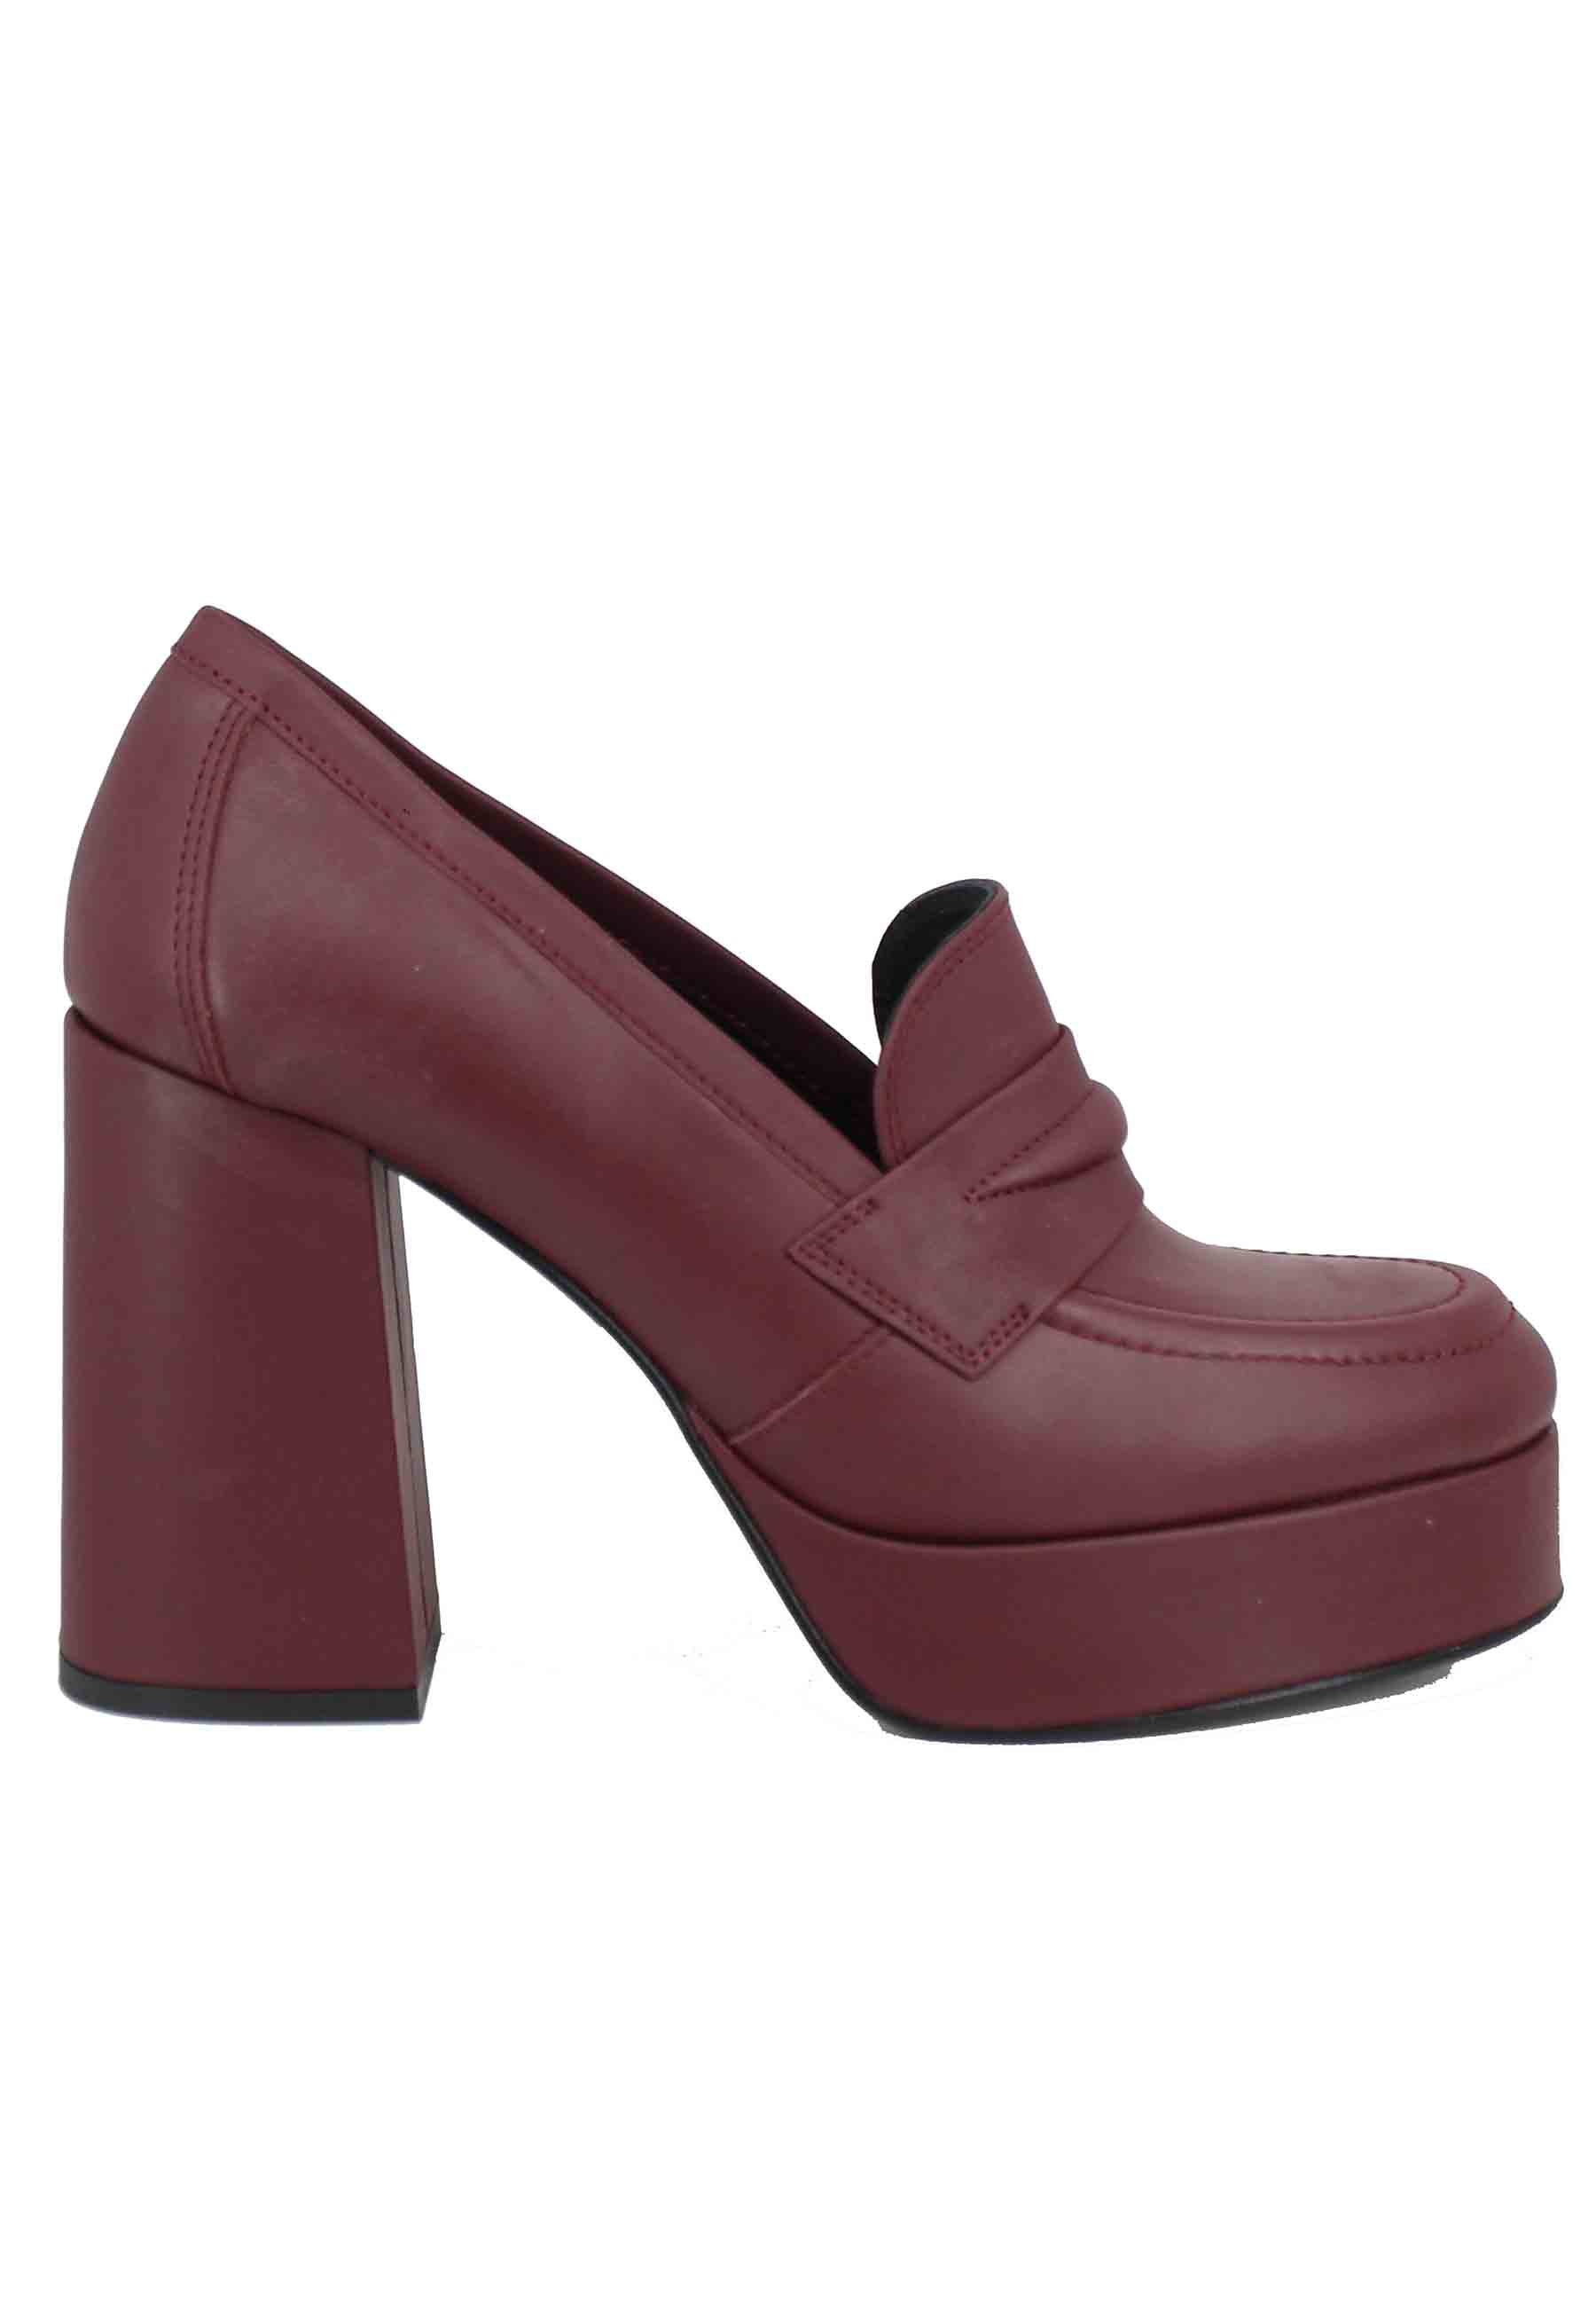 Women's moccasins in burgundy leather with high heel and platform